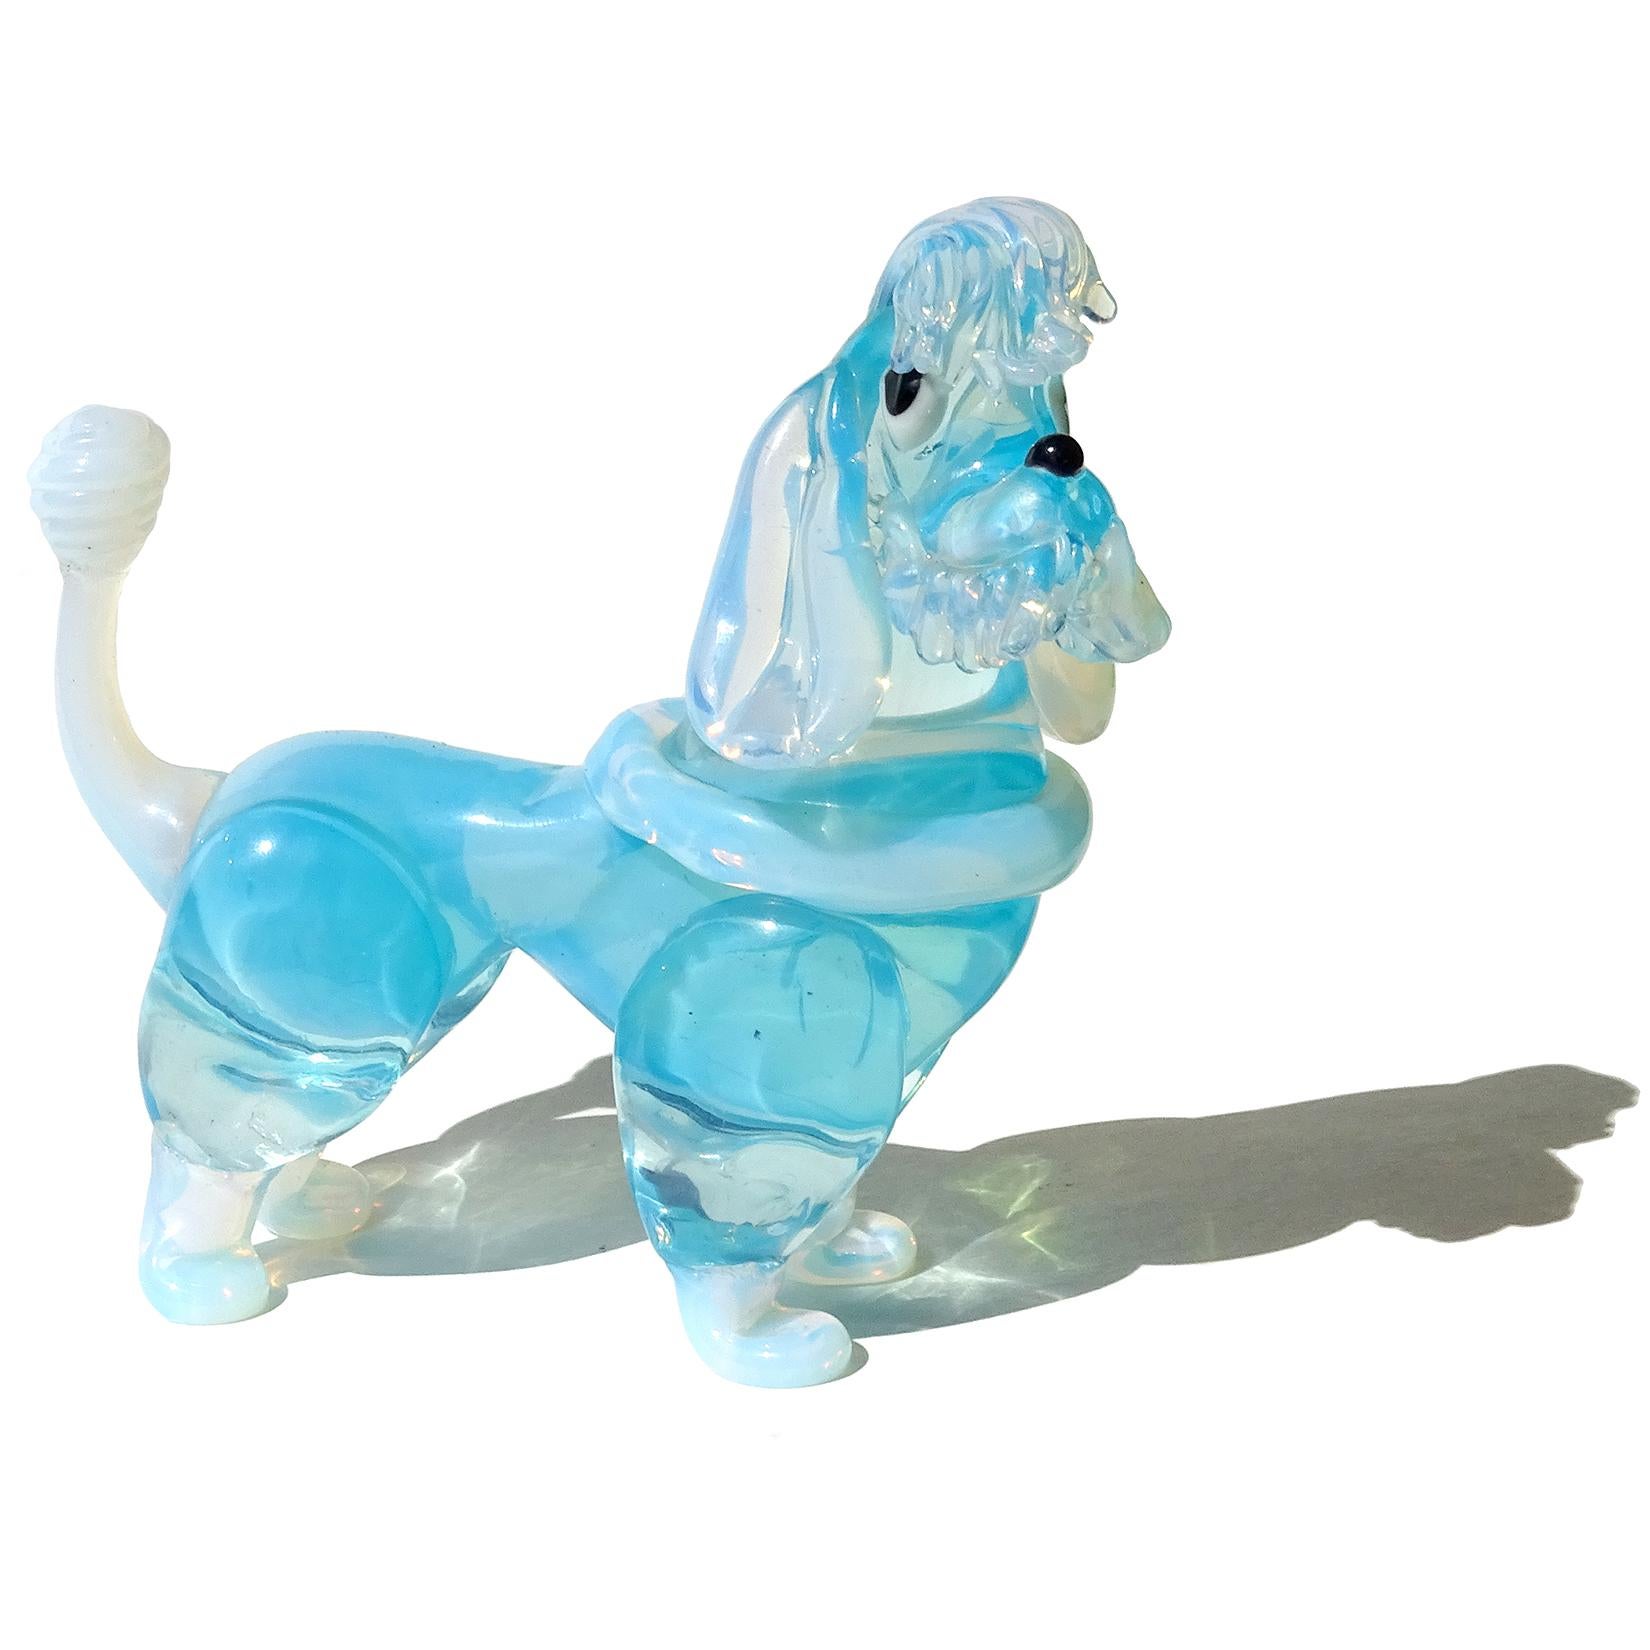 Very cute Murano hand blown opalescent white and blue Italian art glass poodle dog figurine. Attributed to the Barovier e Toso company, circa 1960s. The puppy is incredibly well sculpted, highly detailed with great character. Measures 5 3/4